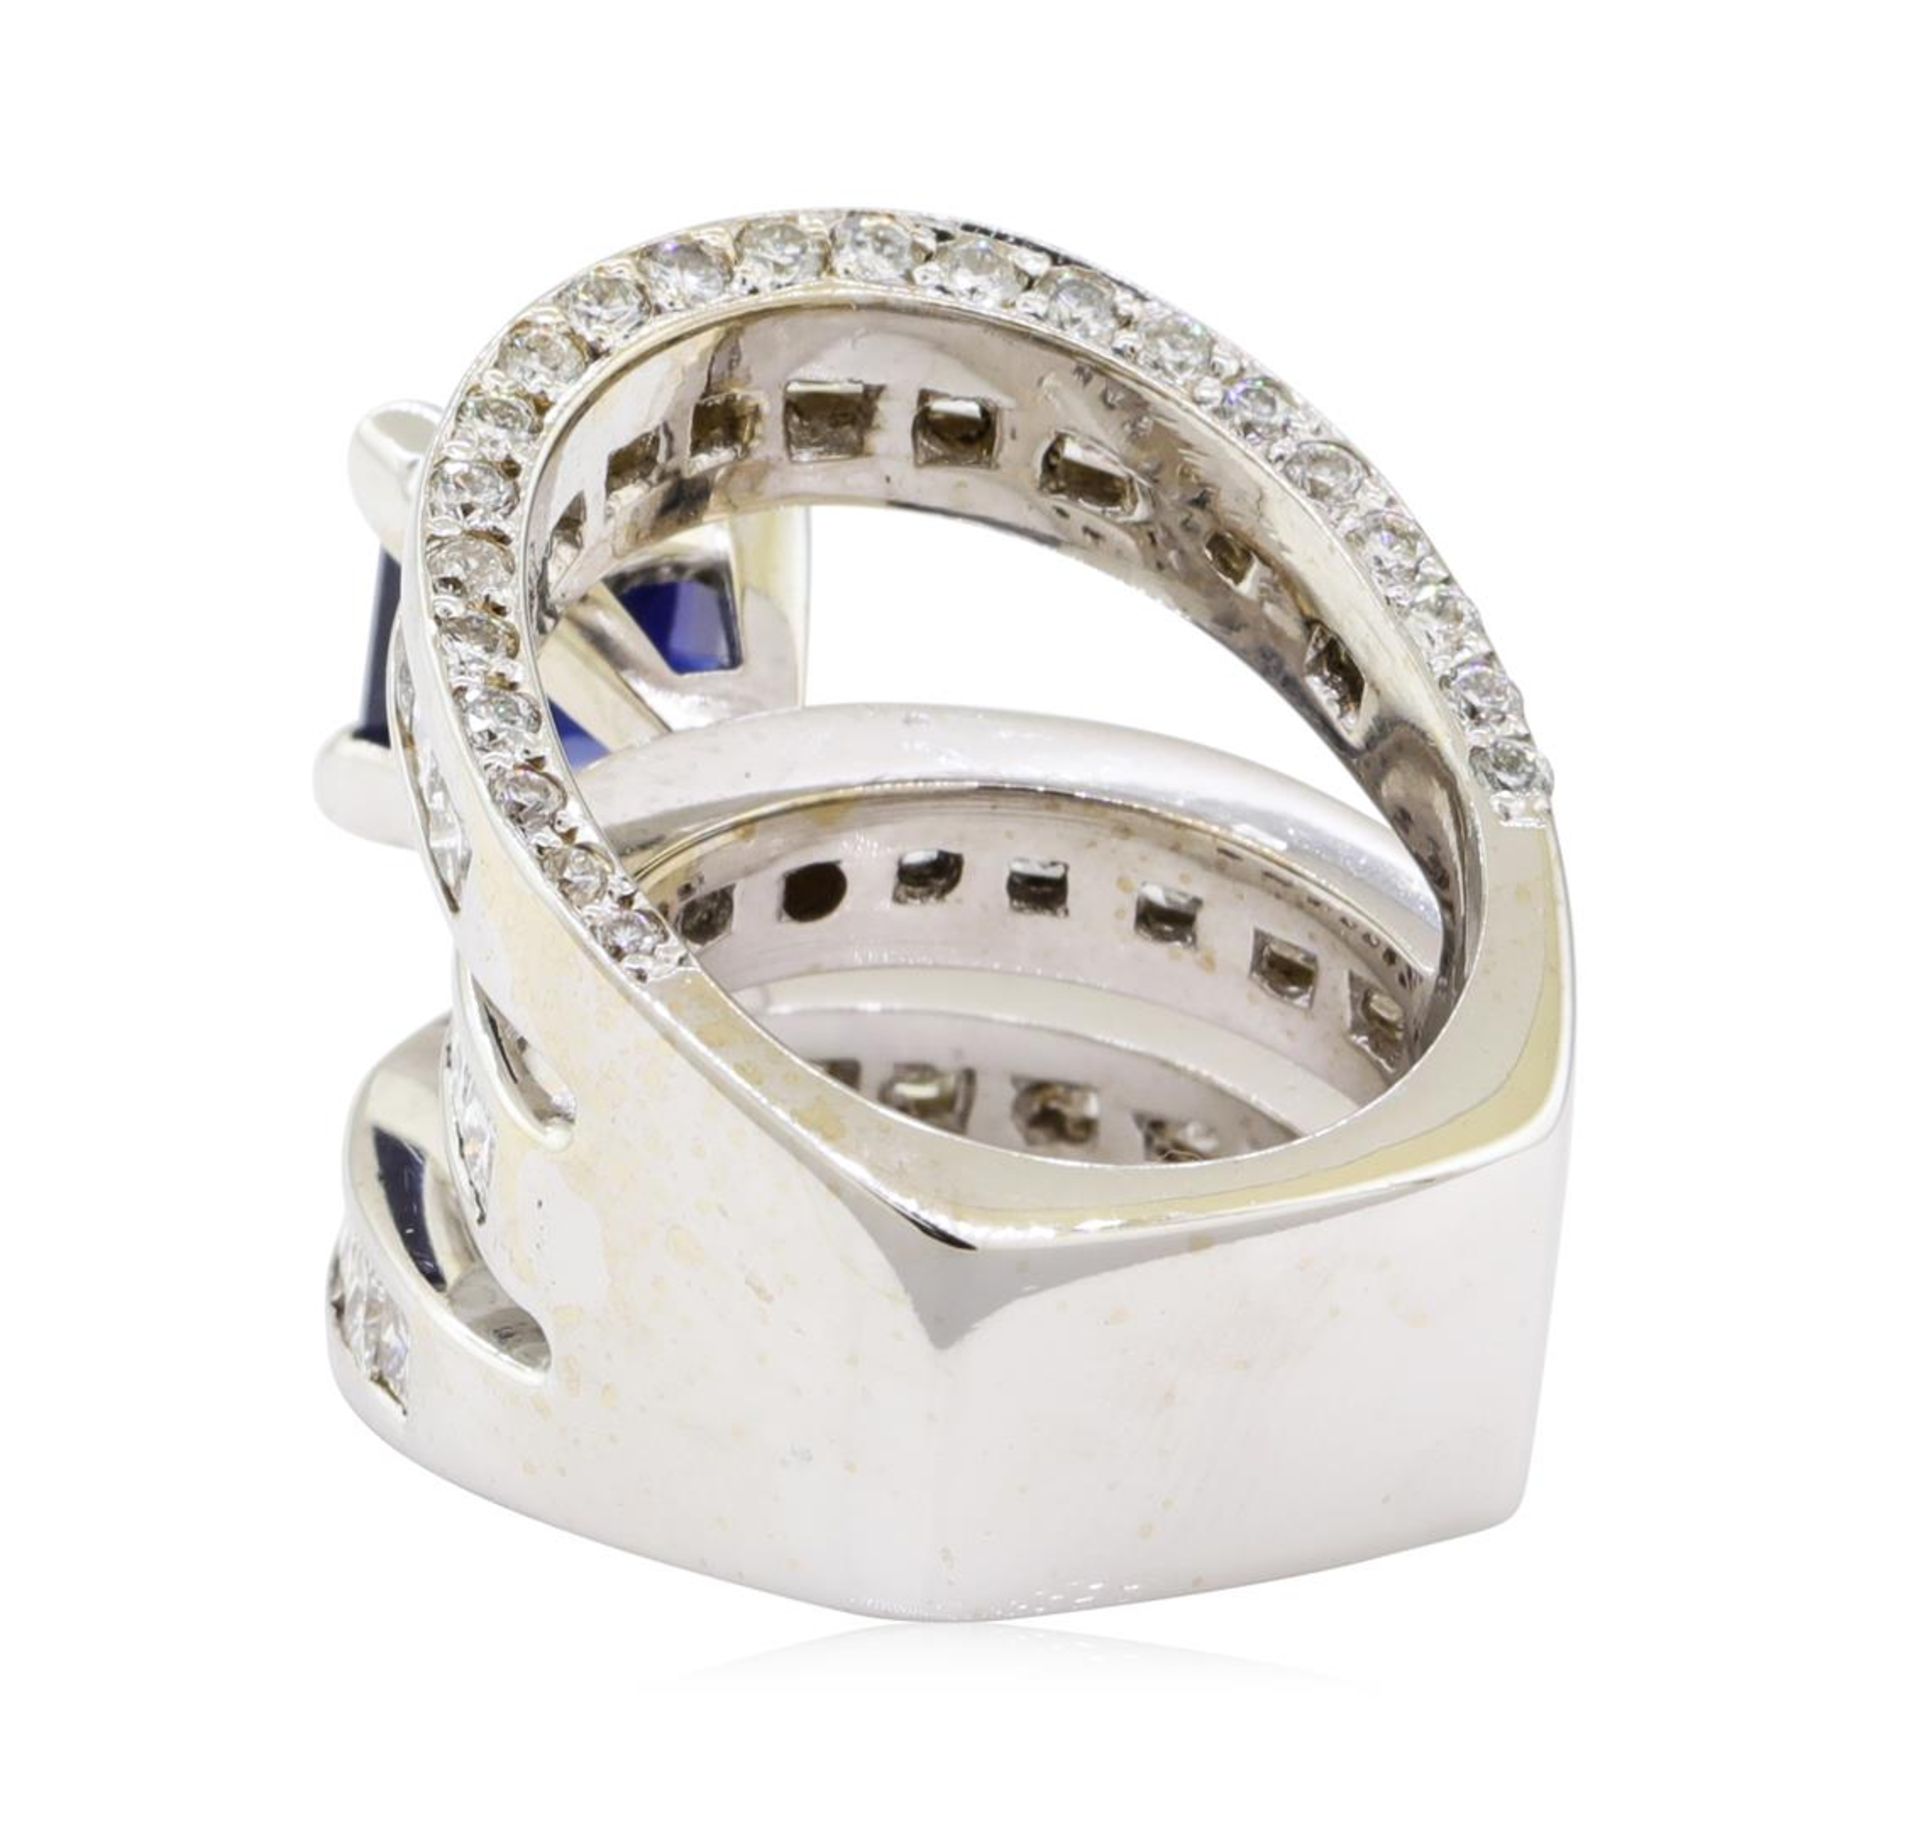 7.40 ctw Sapphire and Diamond Ring - 18KT White Gold - Image 3 of 5